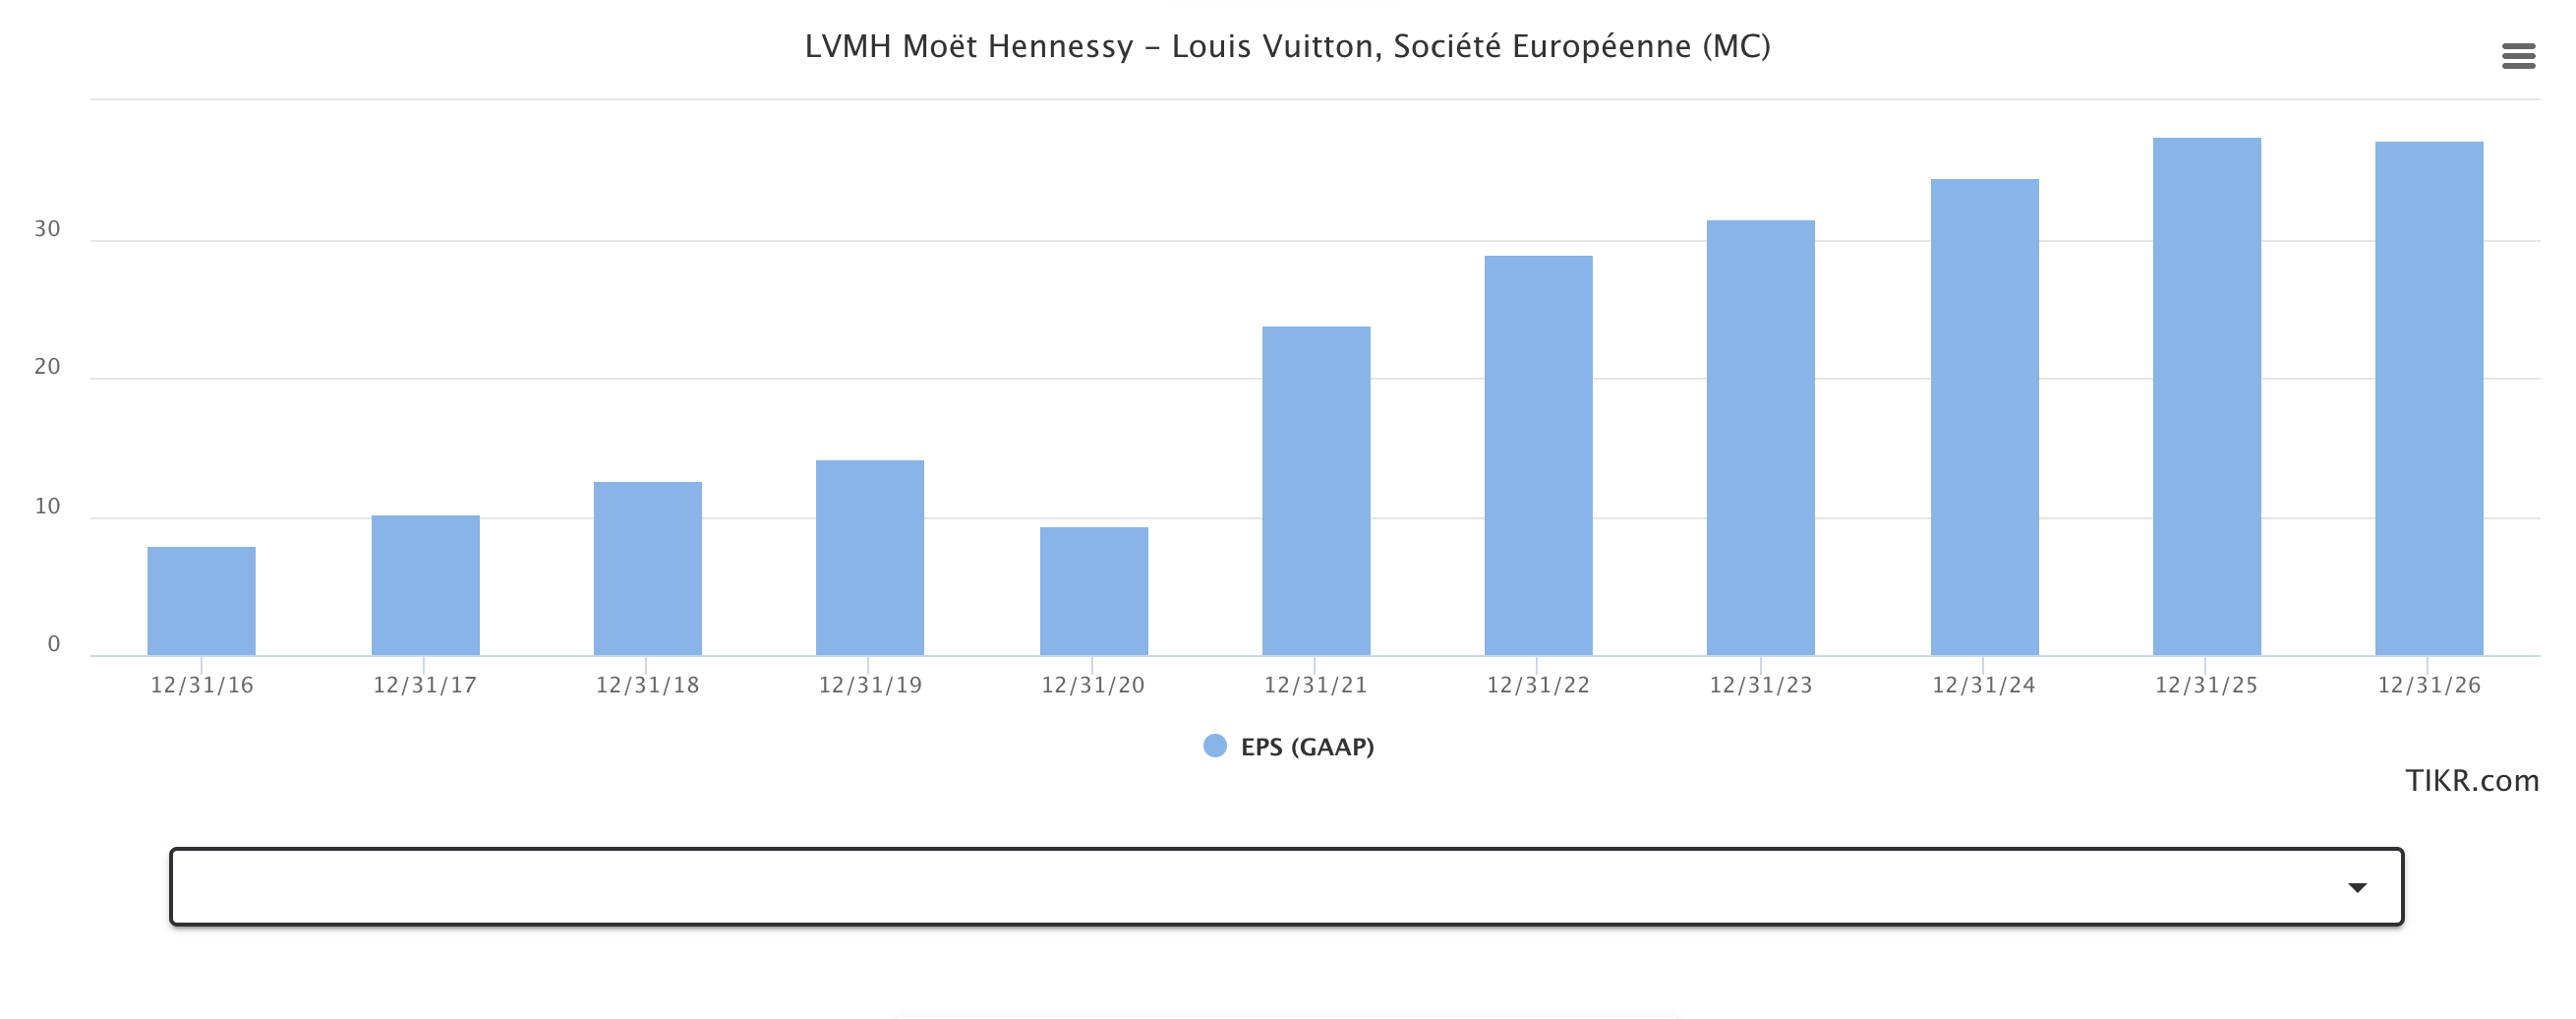 Buy One Share of LVMH Stock as a Gift in 1 Minute